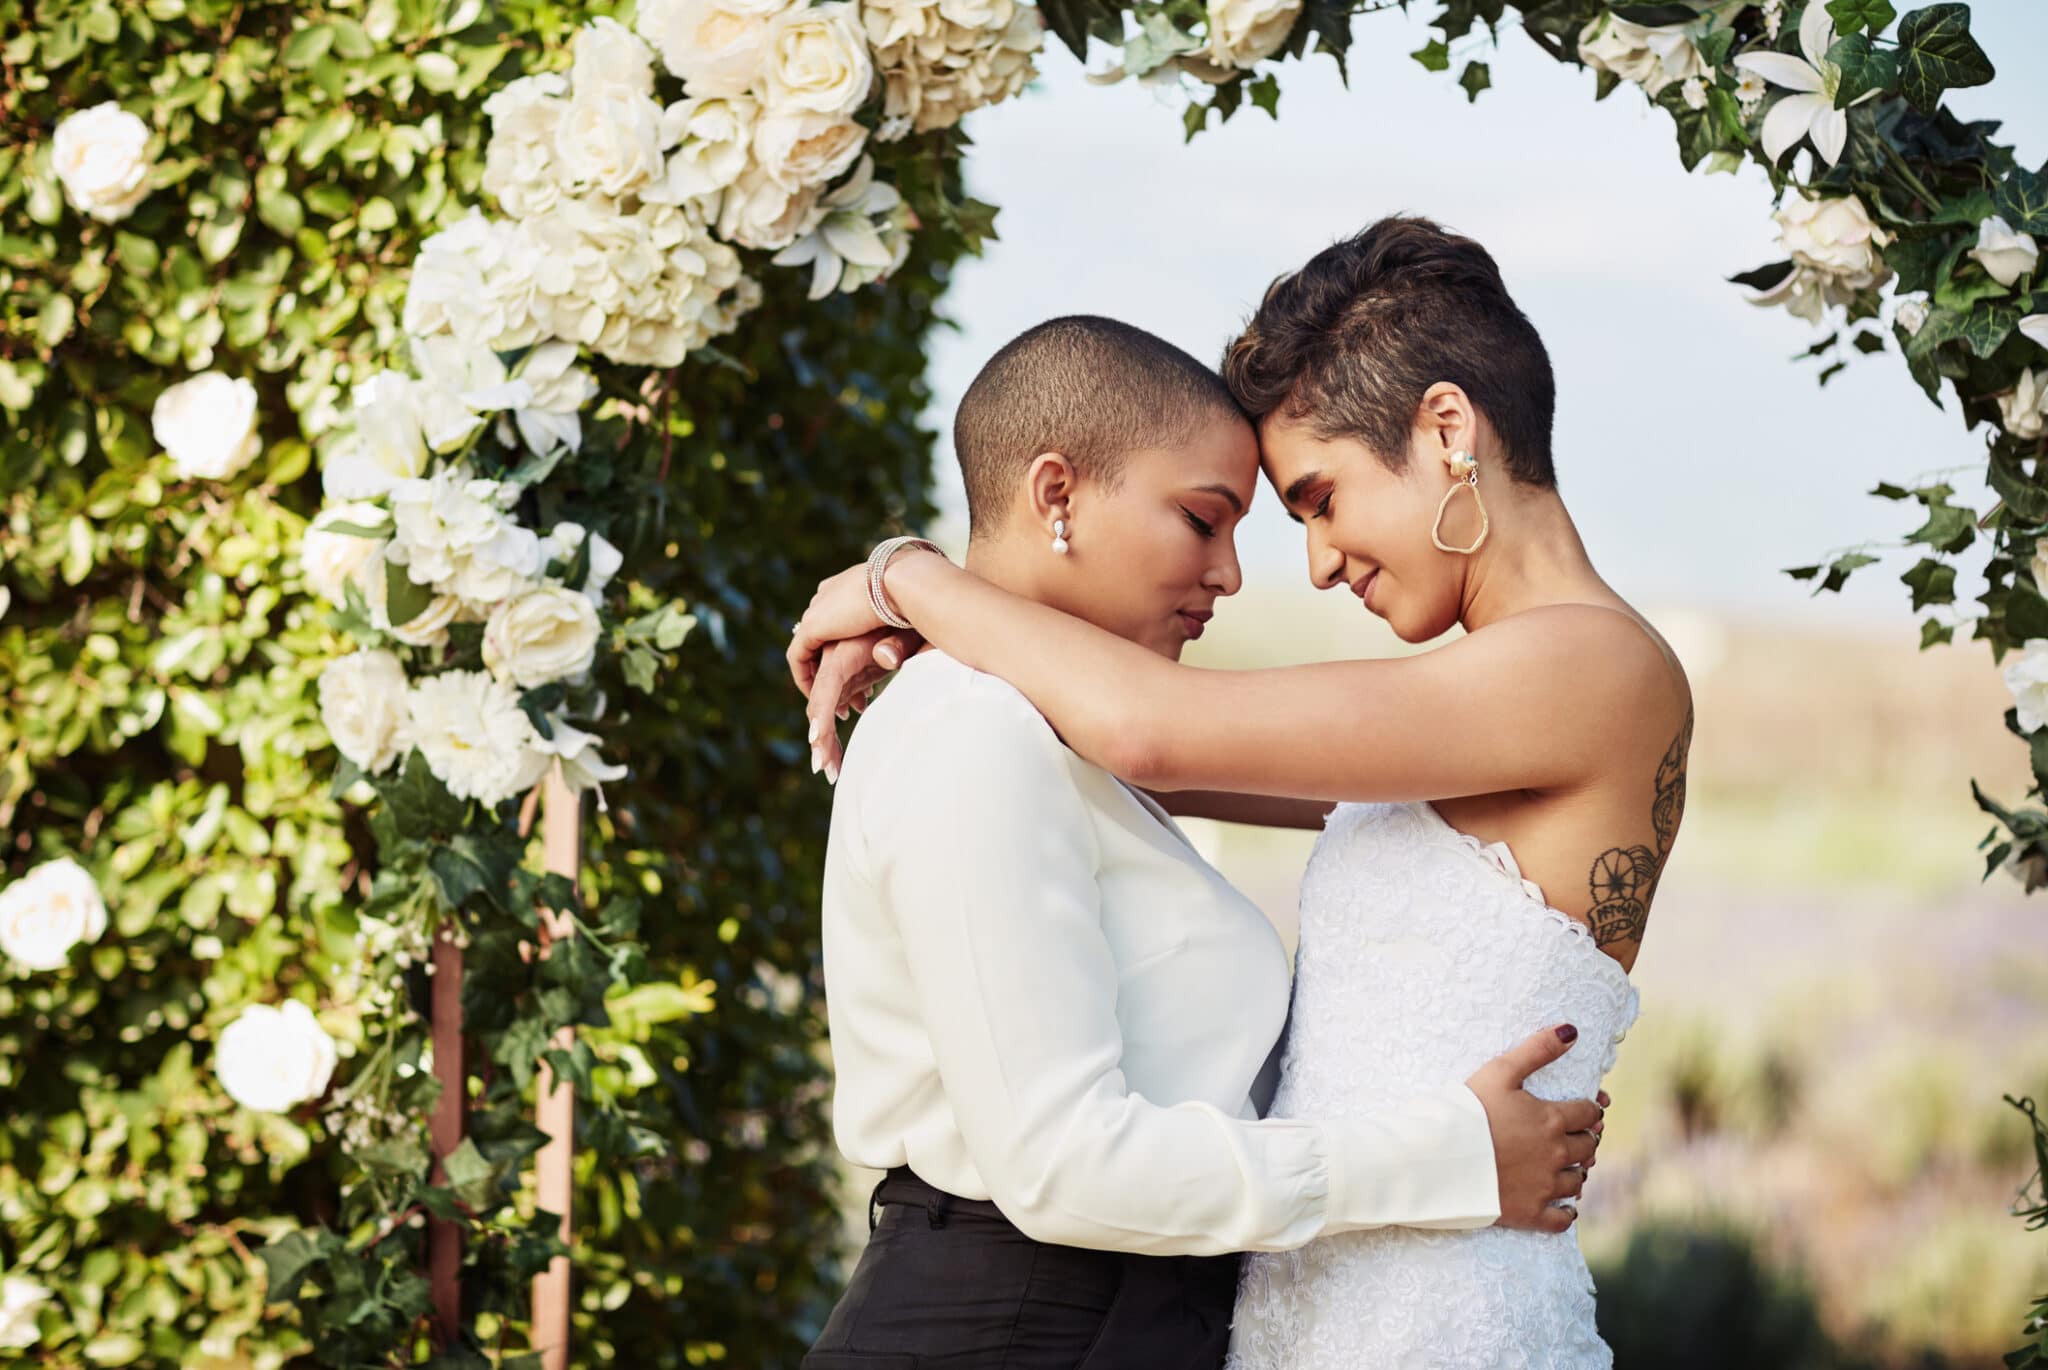 Hotel Issues Grovelling Apology After Refusing Lesbian Wedding